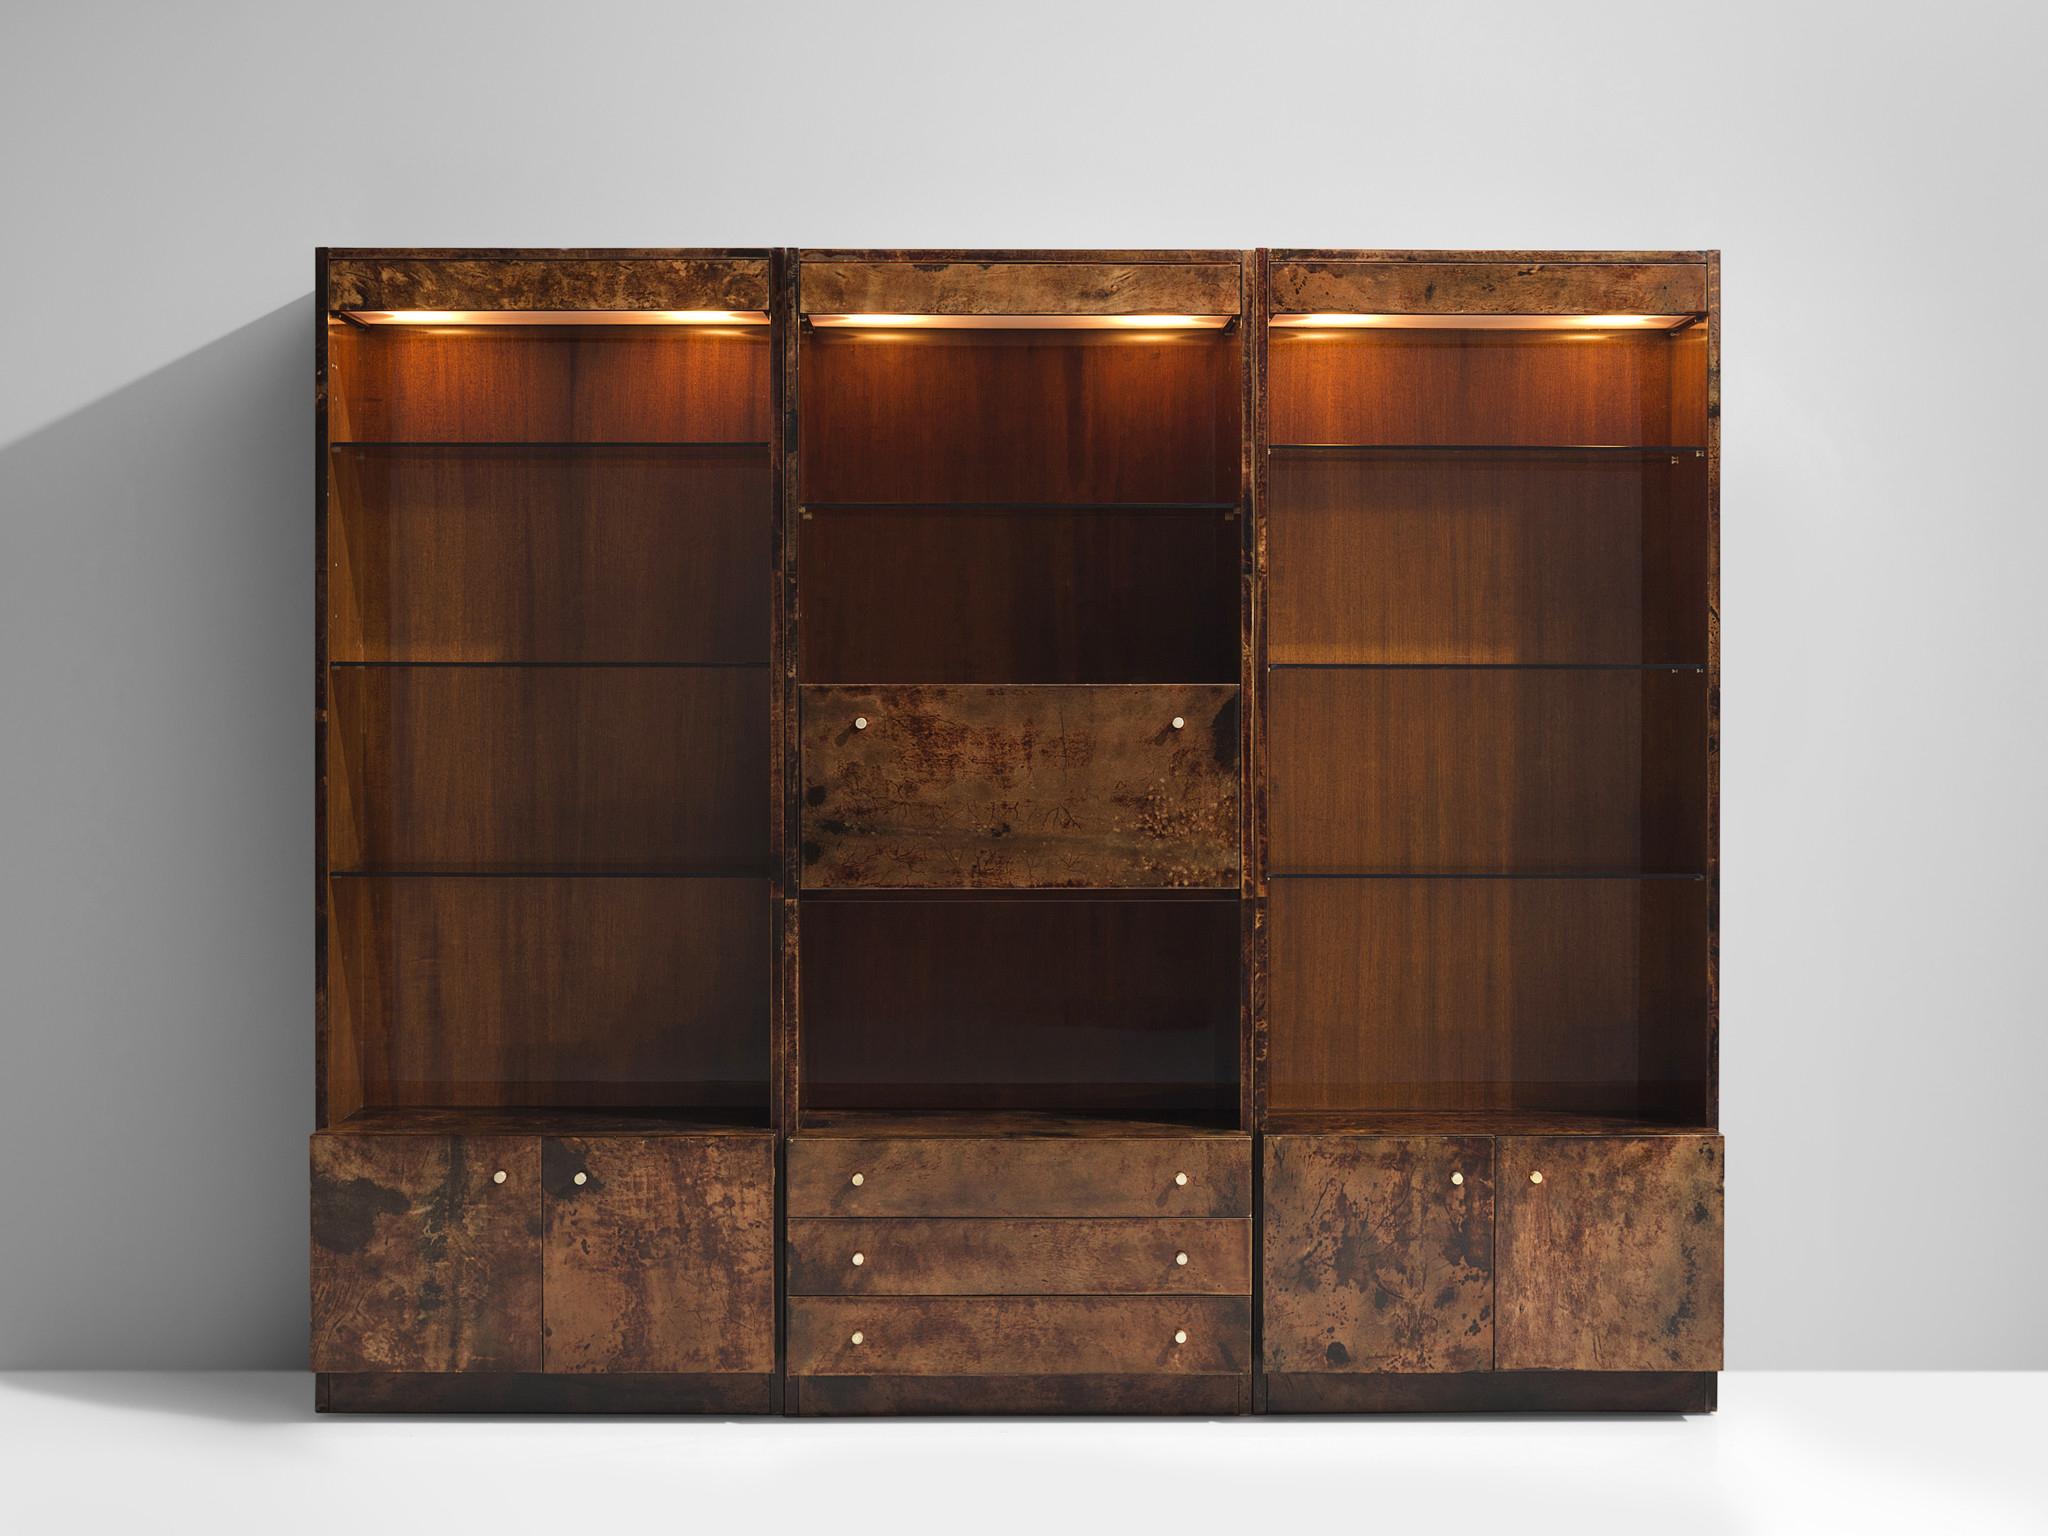 Cabinet, wood lacquered goatskin, Italy, 1940s

This Italian chest is highly elegant and refined. The panels, handles, and patterned doors are all exquisitely produced. There are closed compartments such as drawers, doors and shelves. In the top of